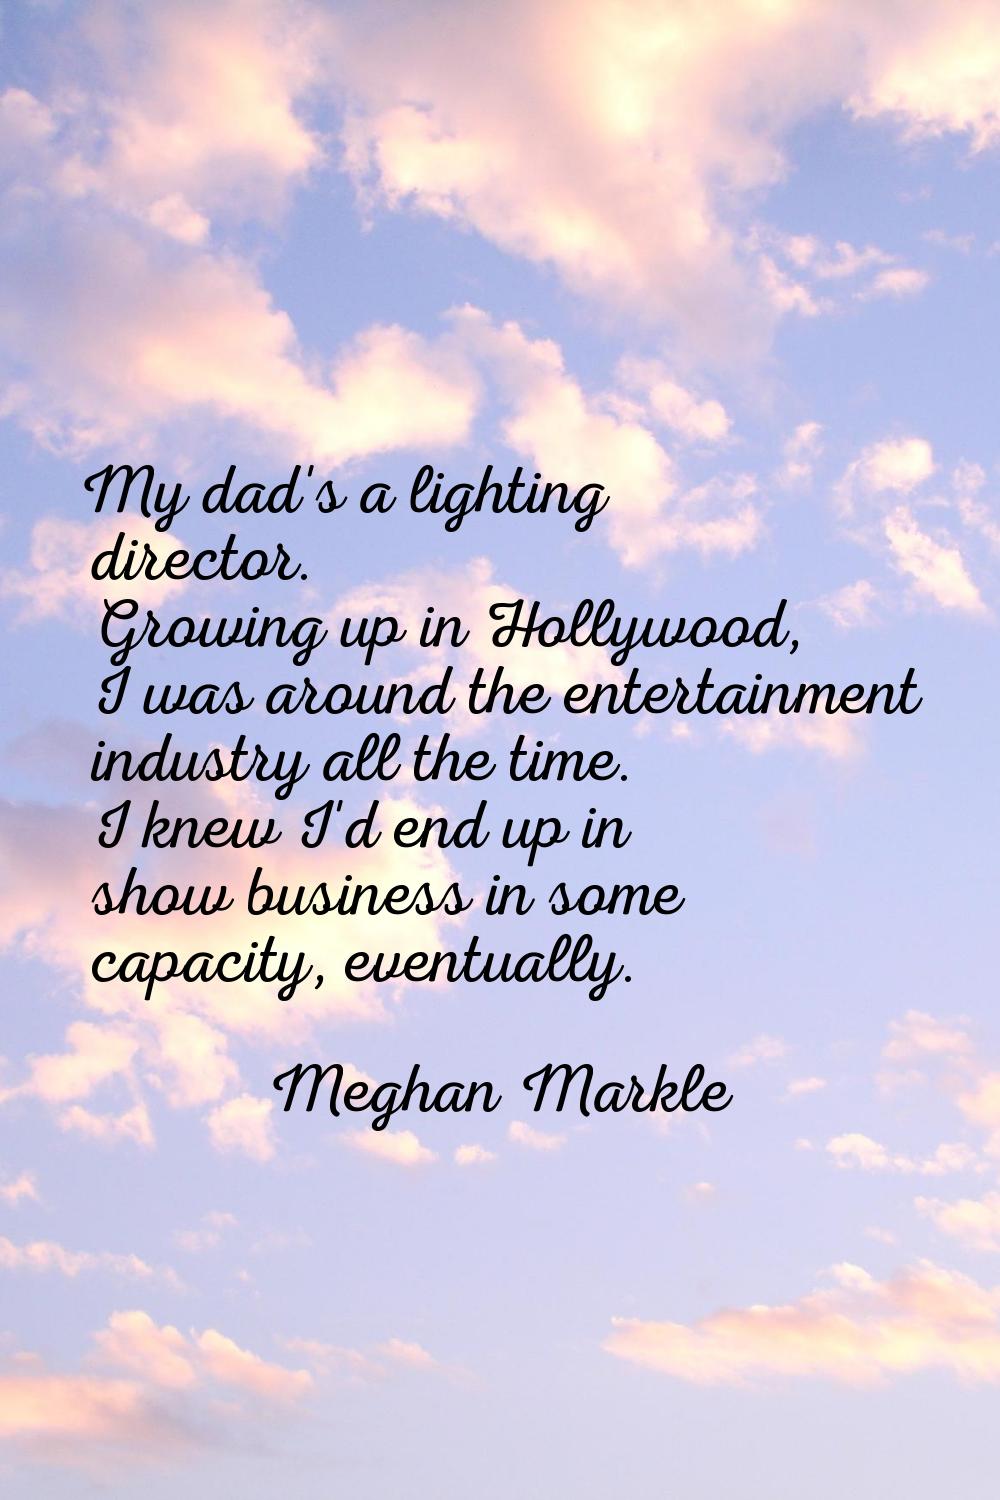 My dad's a lighting director. Growing up in Hollywood, I was around the entertainment industry all 